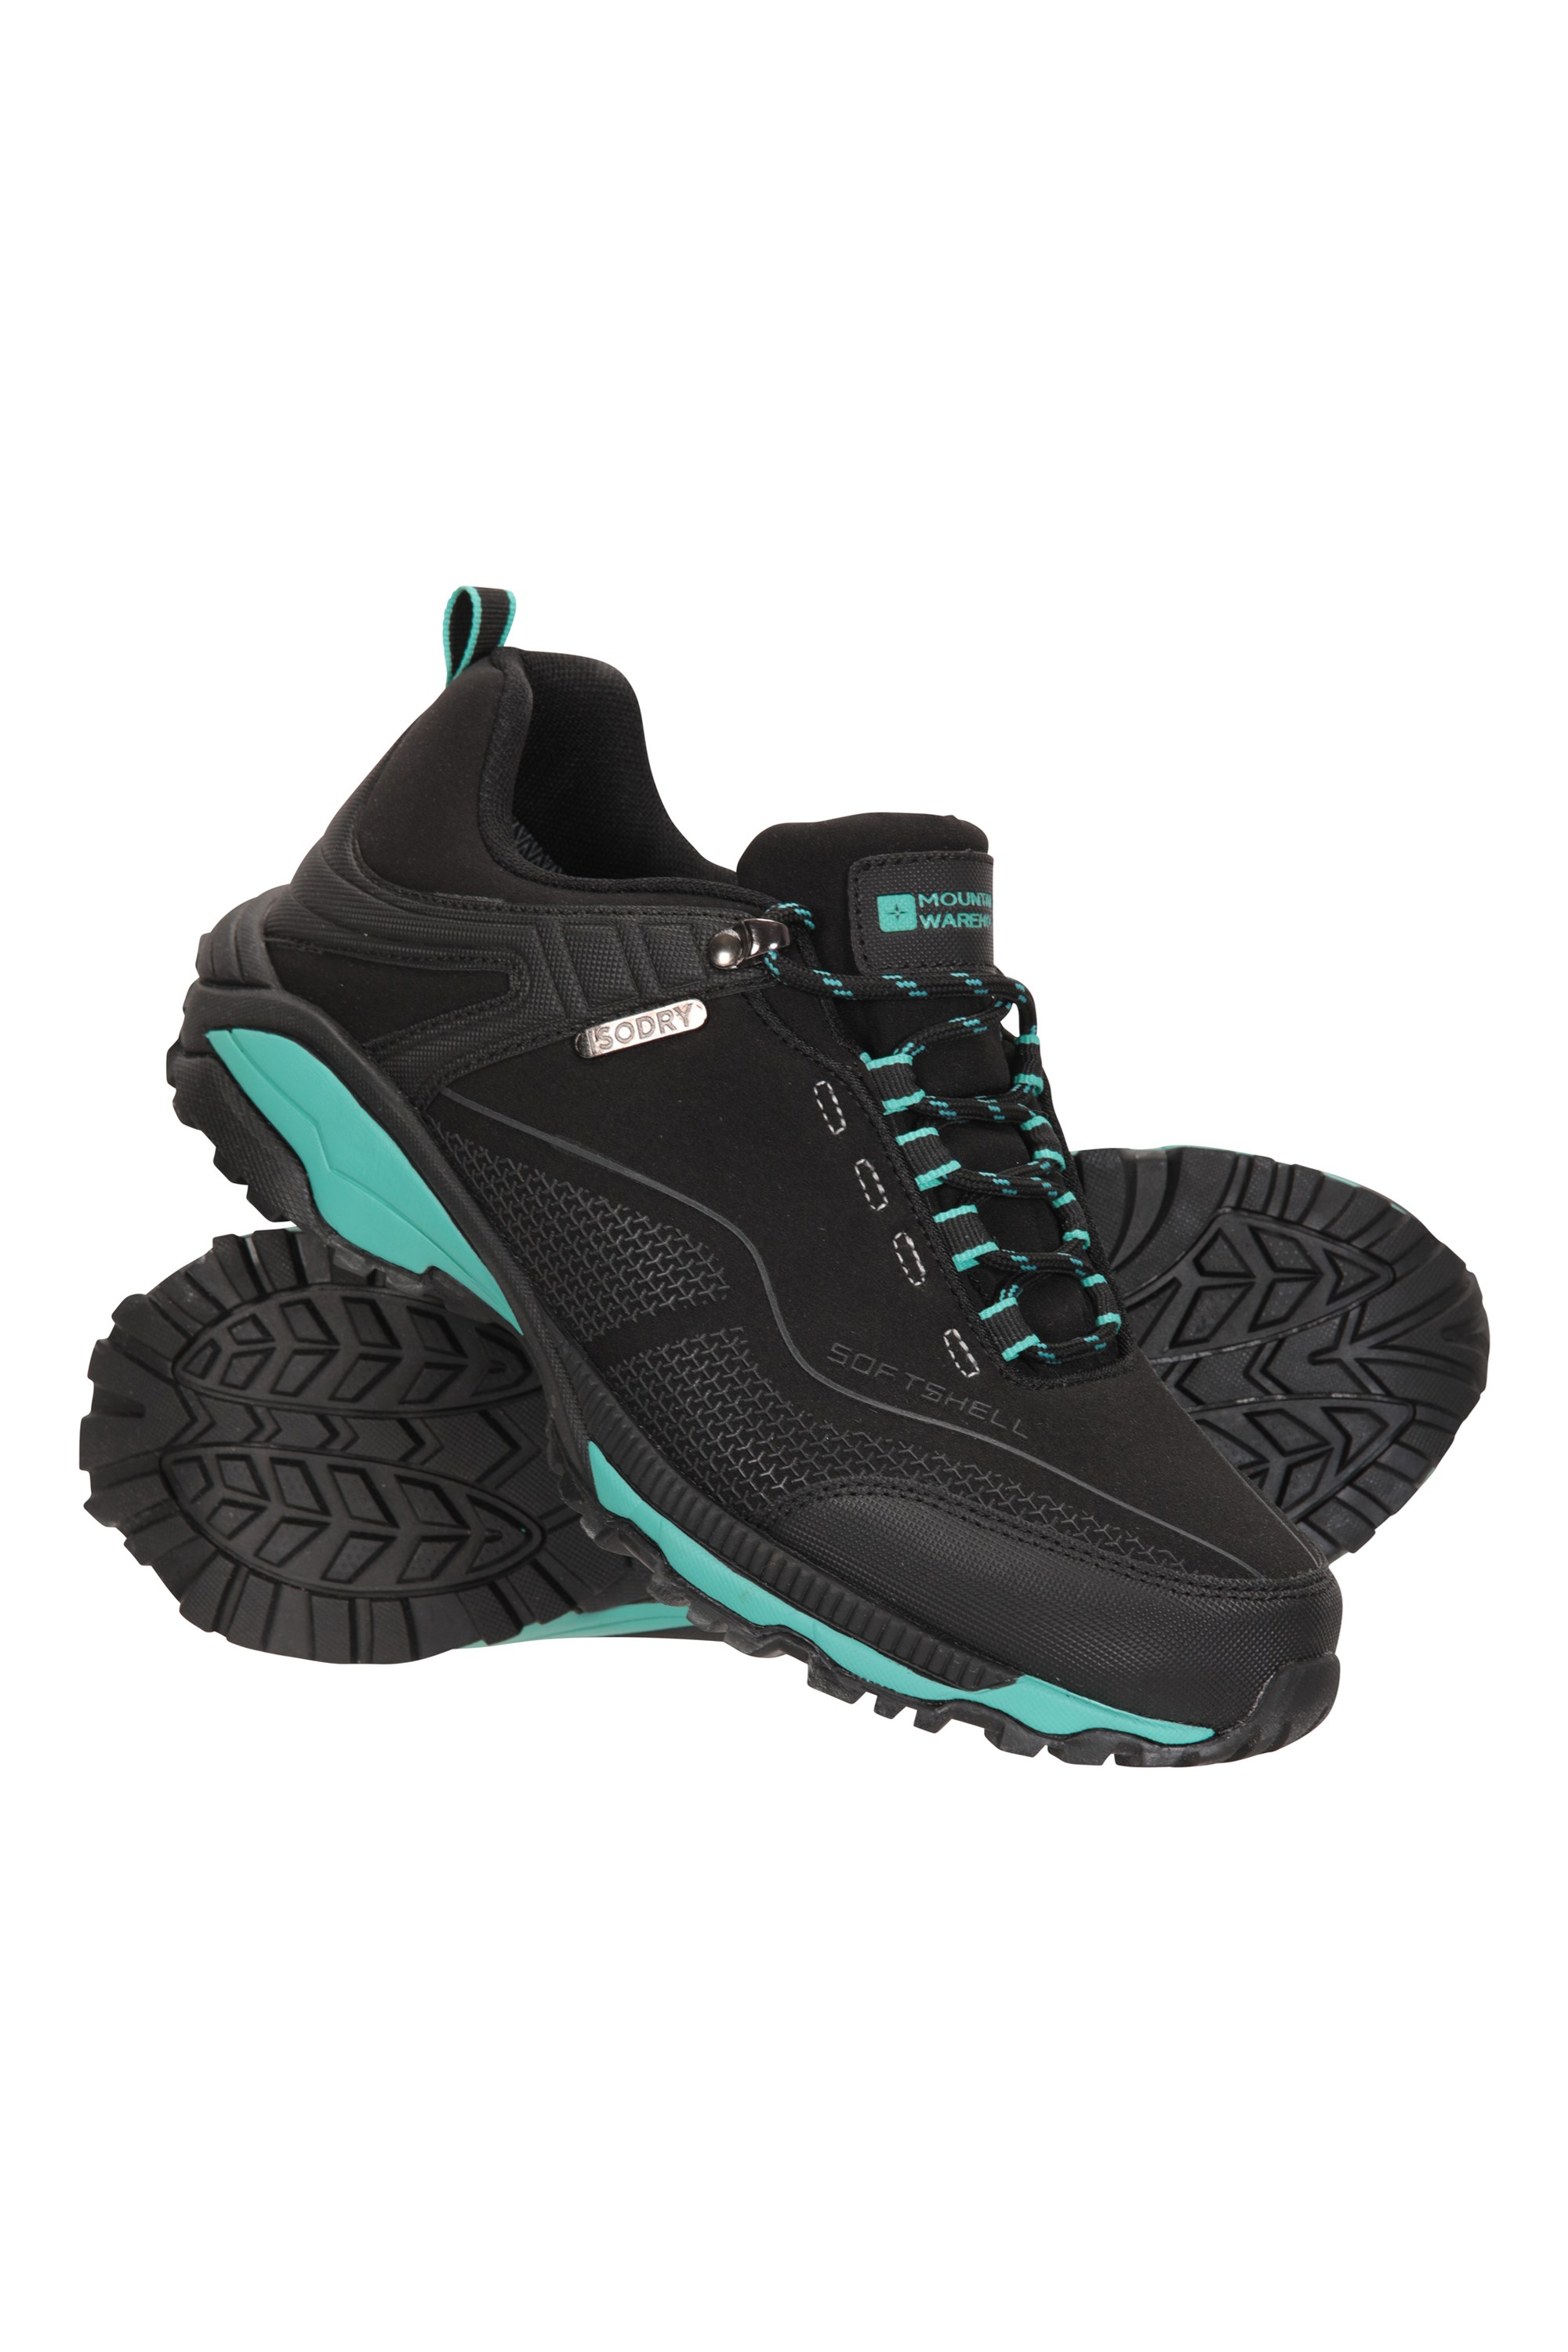 Collie Womens Waterproof Approach Shoes 